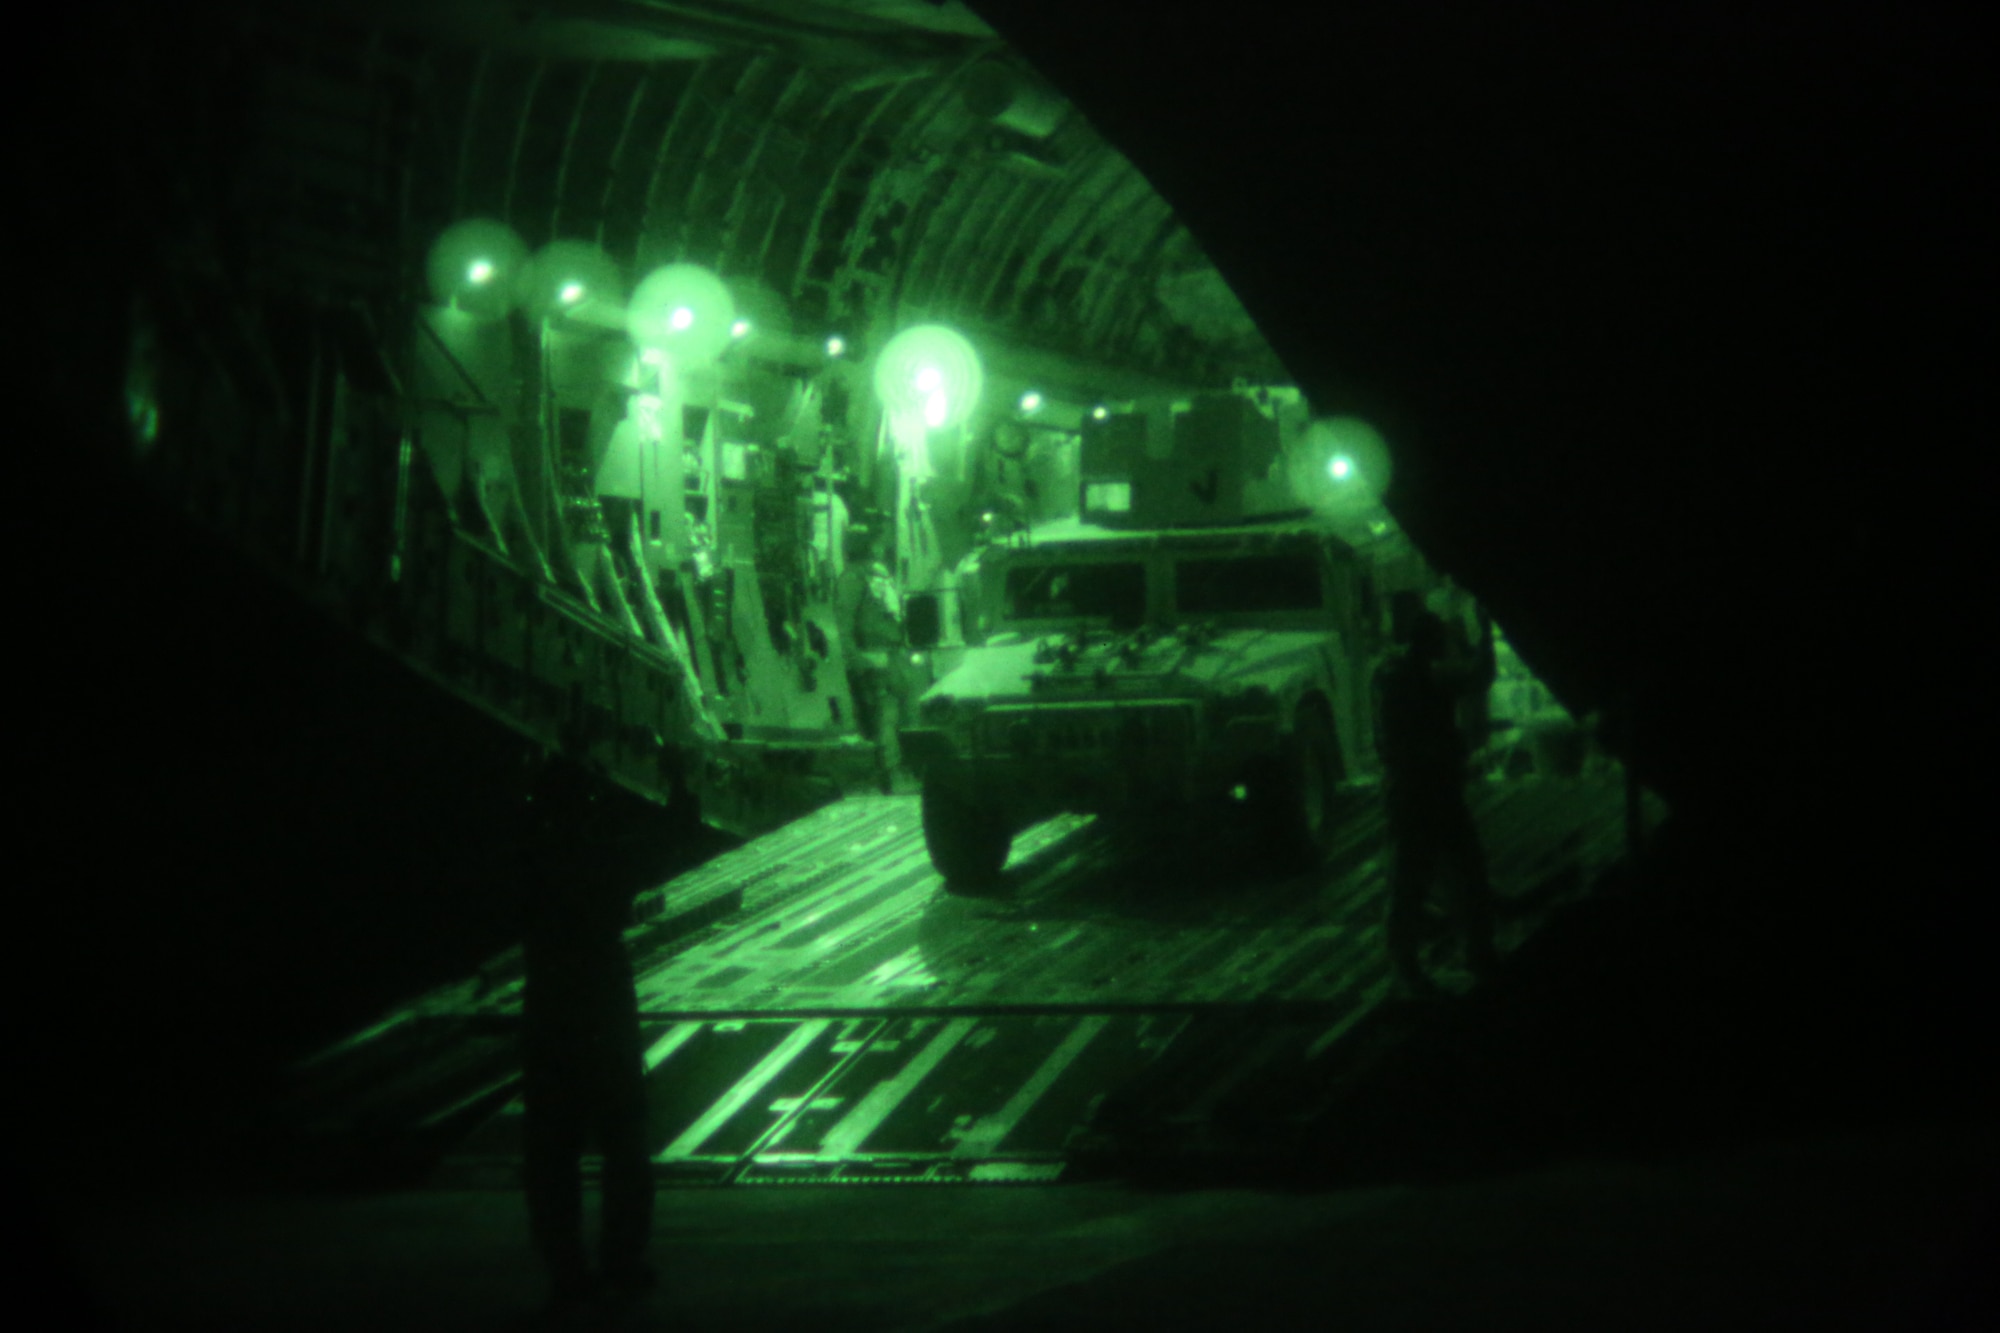 U.S. Airmen with 321st Contingency Response Element offload a Humvee from a C-17 Globemaster at Al Taqaddum Air Base, Iraq, July 1, 2015. The 321st also has the capability to offload pallets up to 10,000 pounds using a forklift and can offload up to three pallets at a time using the 25k Halverson loader, during expeditionary airfield operations. (U.S. Marine Corps photo by Cpl. John Baker / RELEASED)